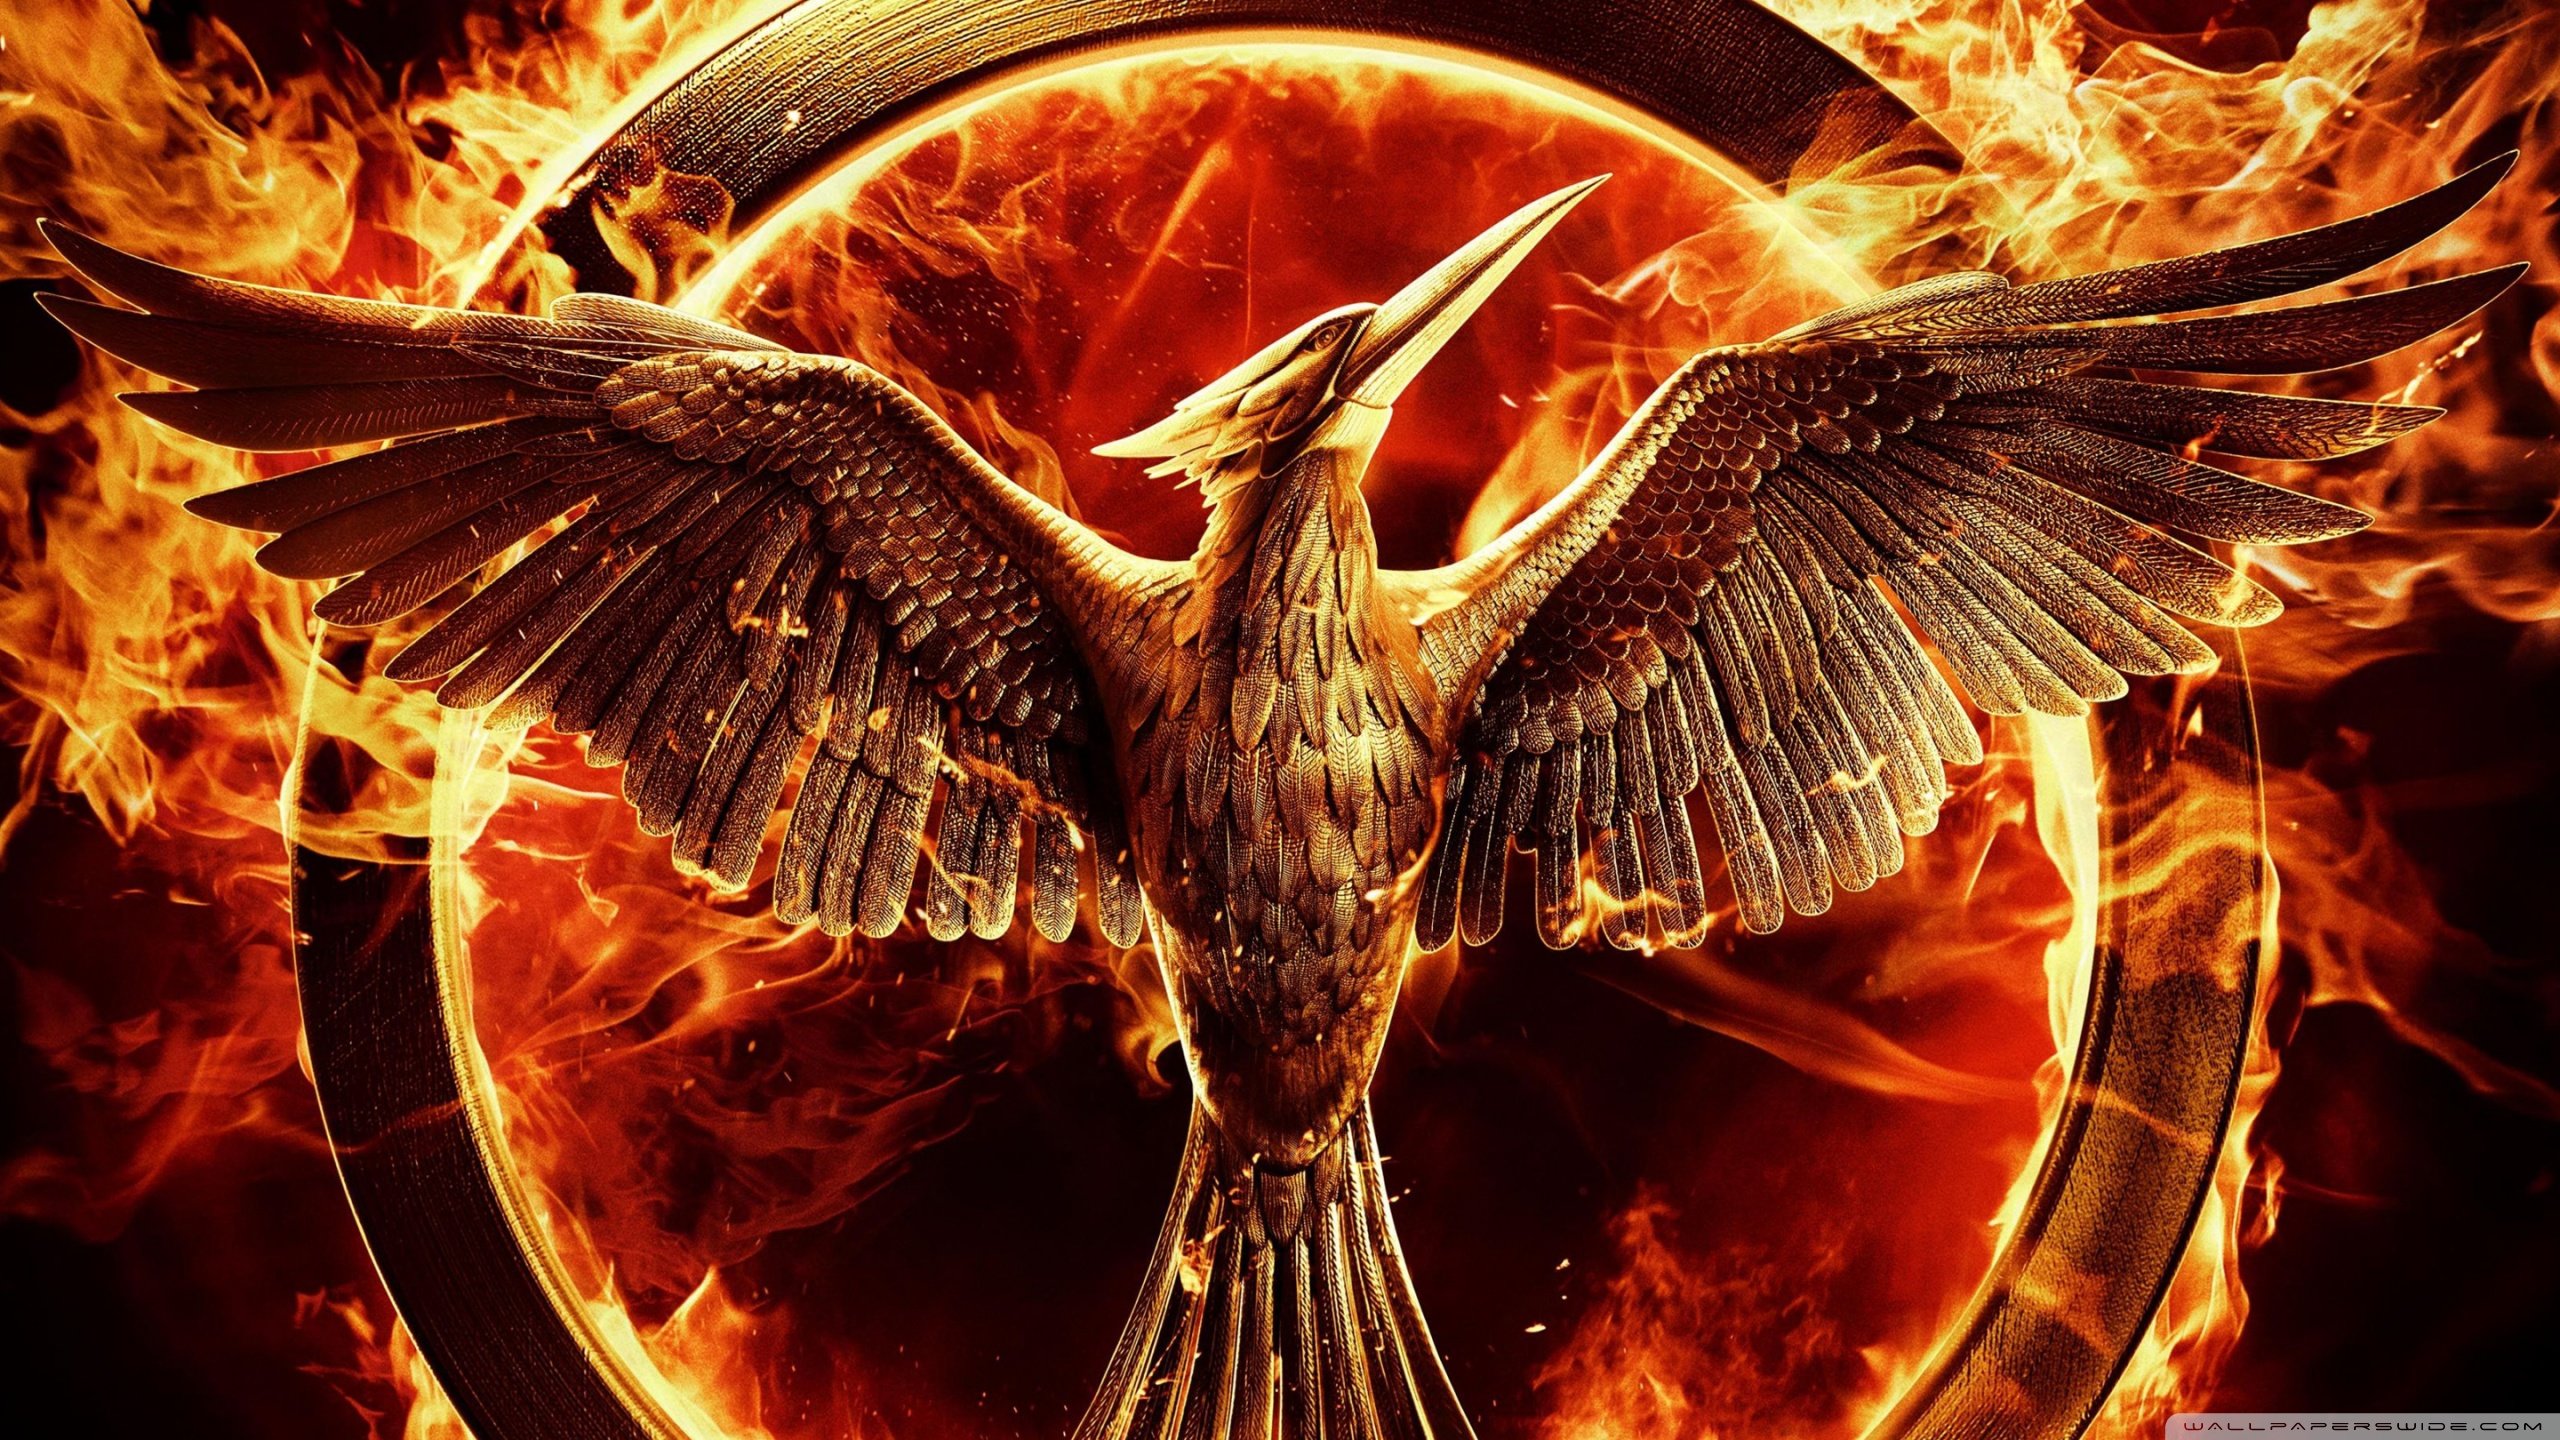 The Hunger Games Mockingjay   Part 1 Wallpapers and Background